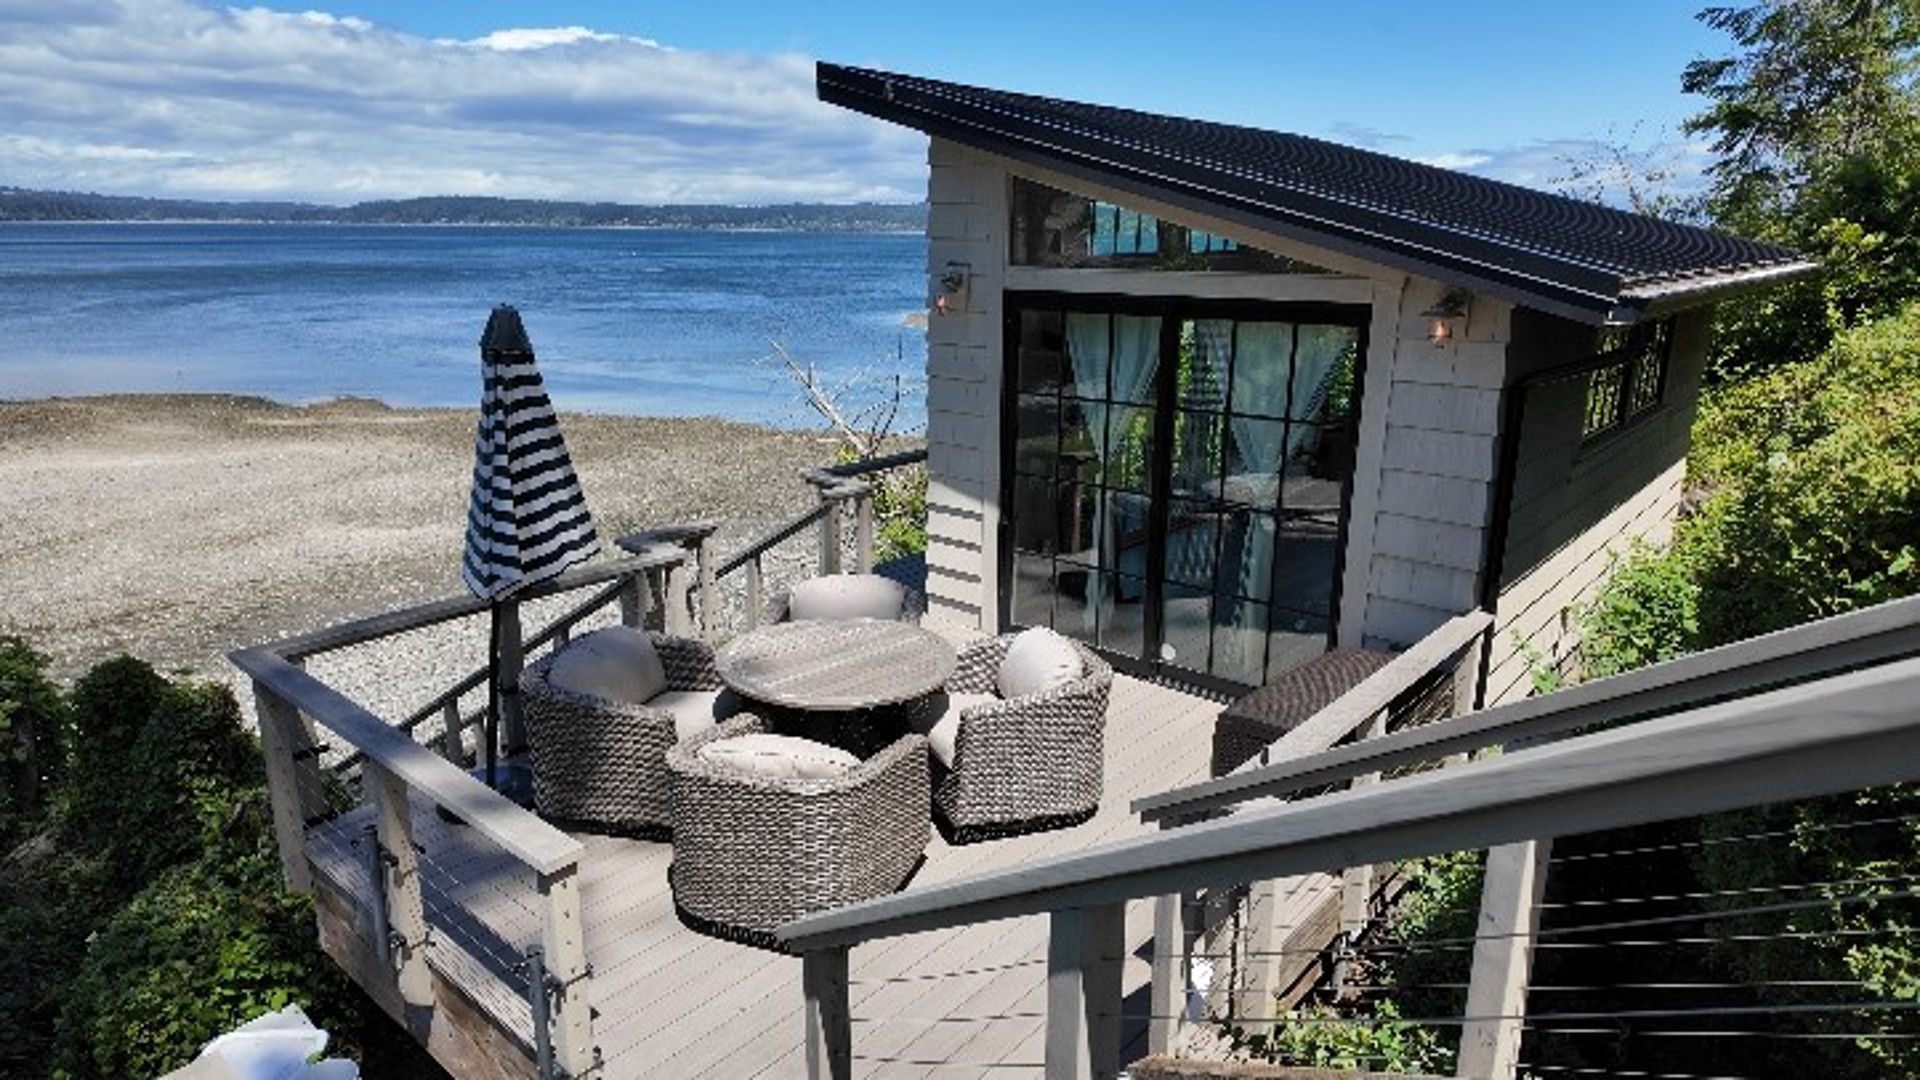 The home was custom-built to take in the water views. #k5evening